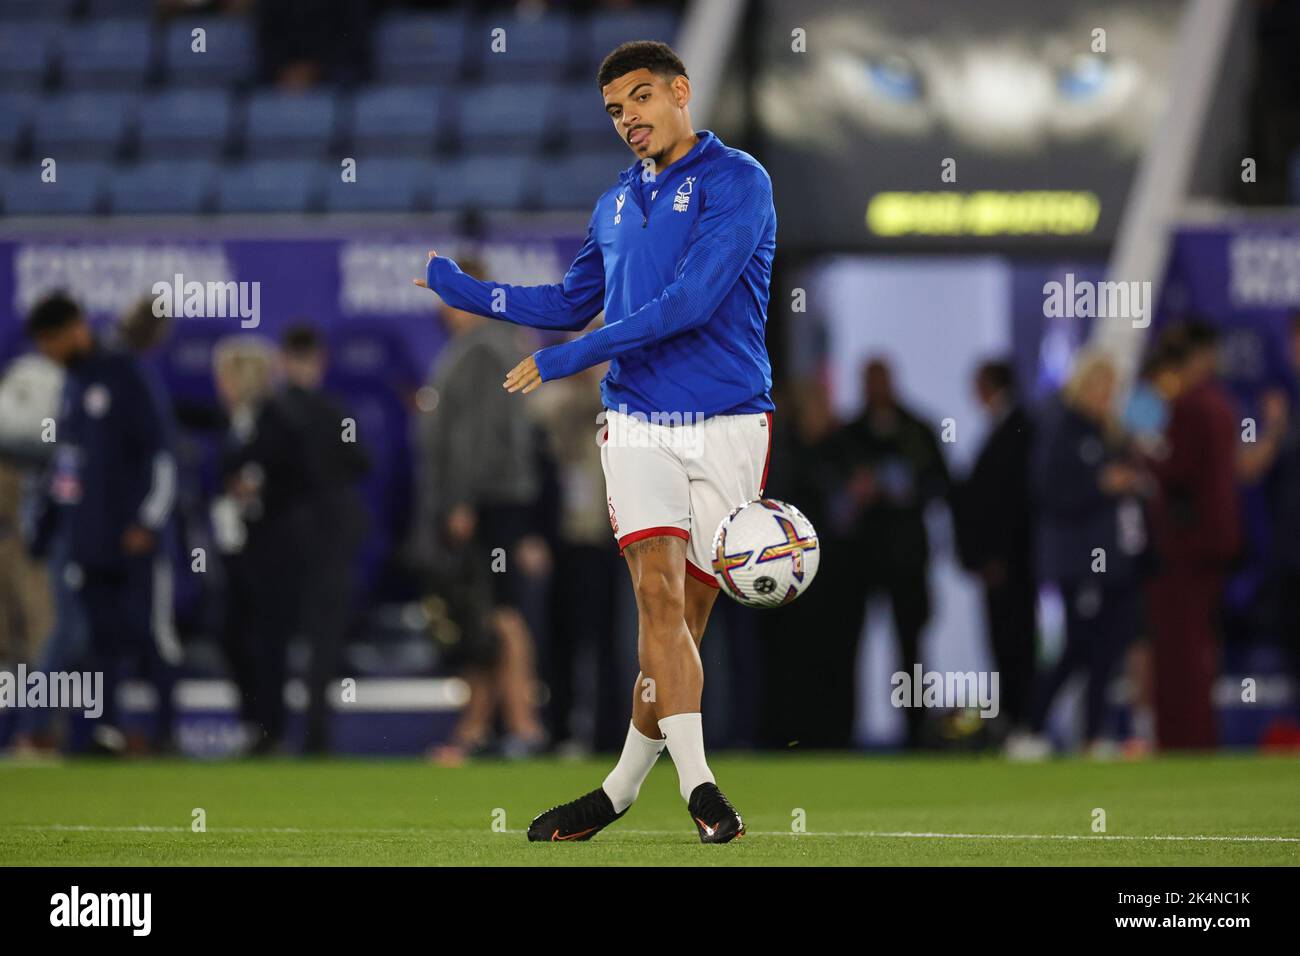 Morgan Gibbs-White #10 of Nottingham Forest during the pre-game warmup ahead of the Premier League match Leicester City vs Nottingham Forest at King Power Stadium, Leicester, United Kingdom, 3rd October 2022  (Photo by Mark Cosgrove/News Images) Stock Photo